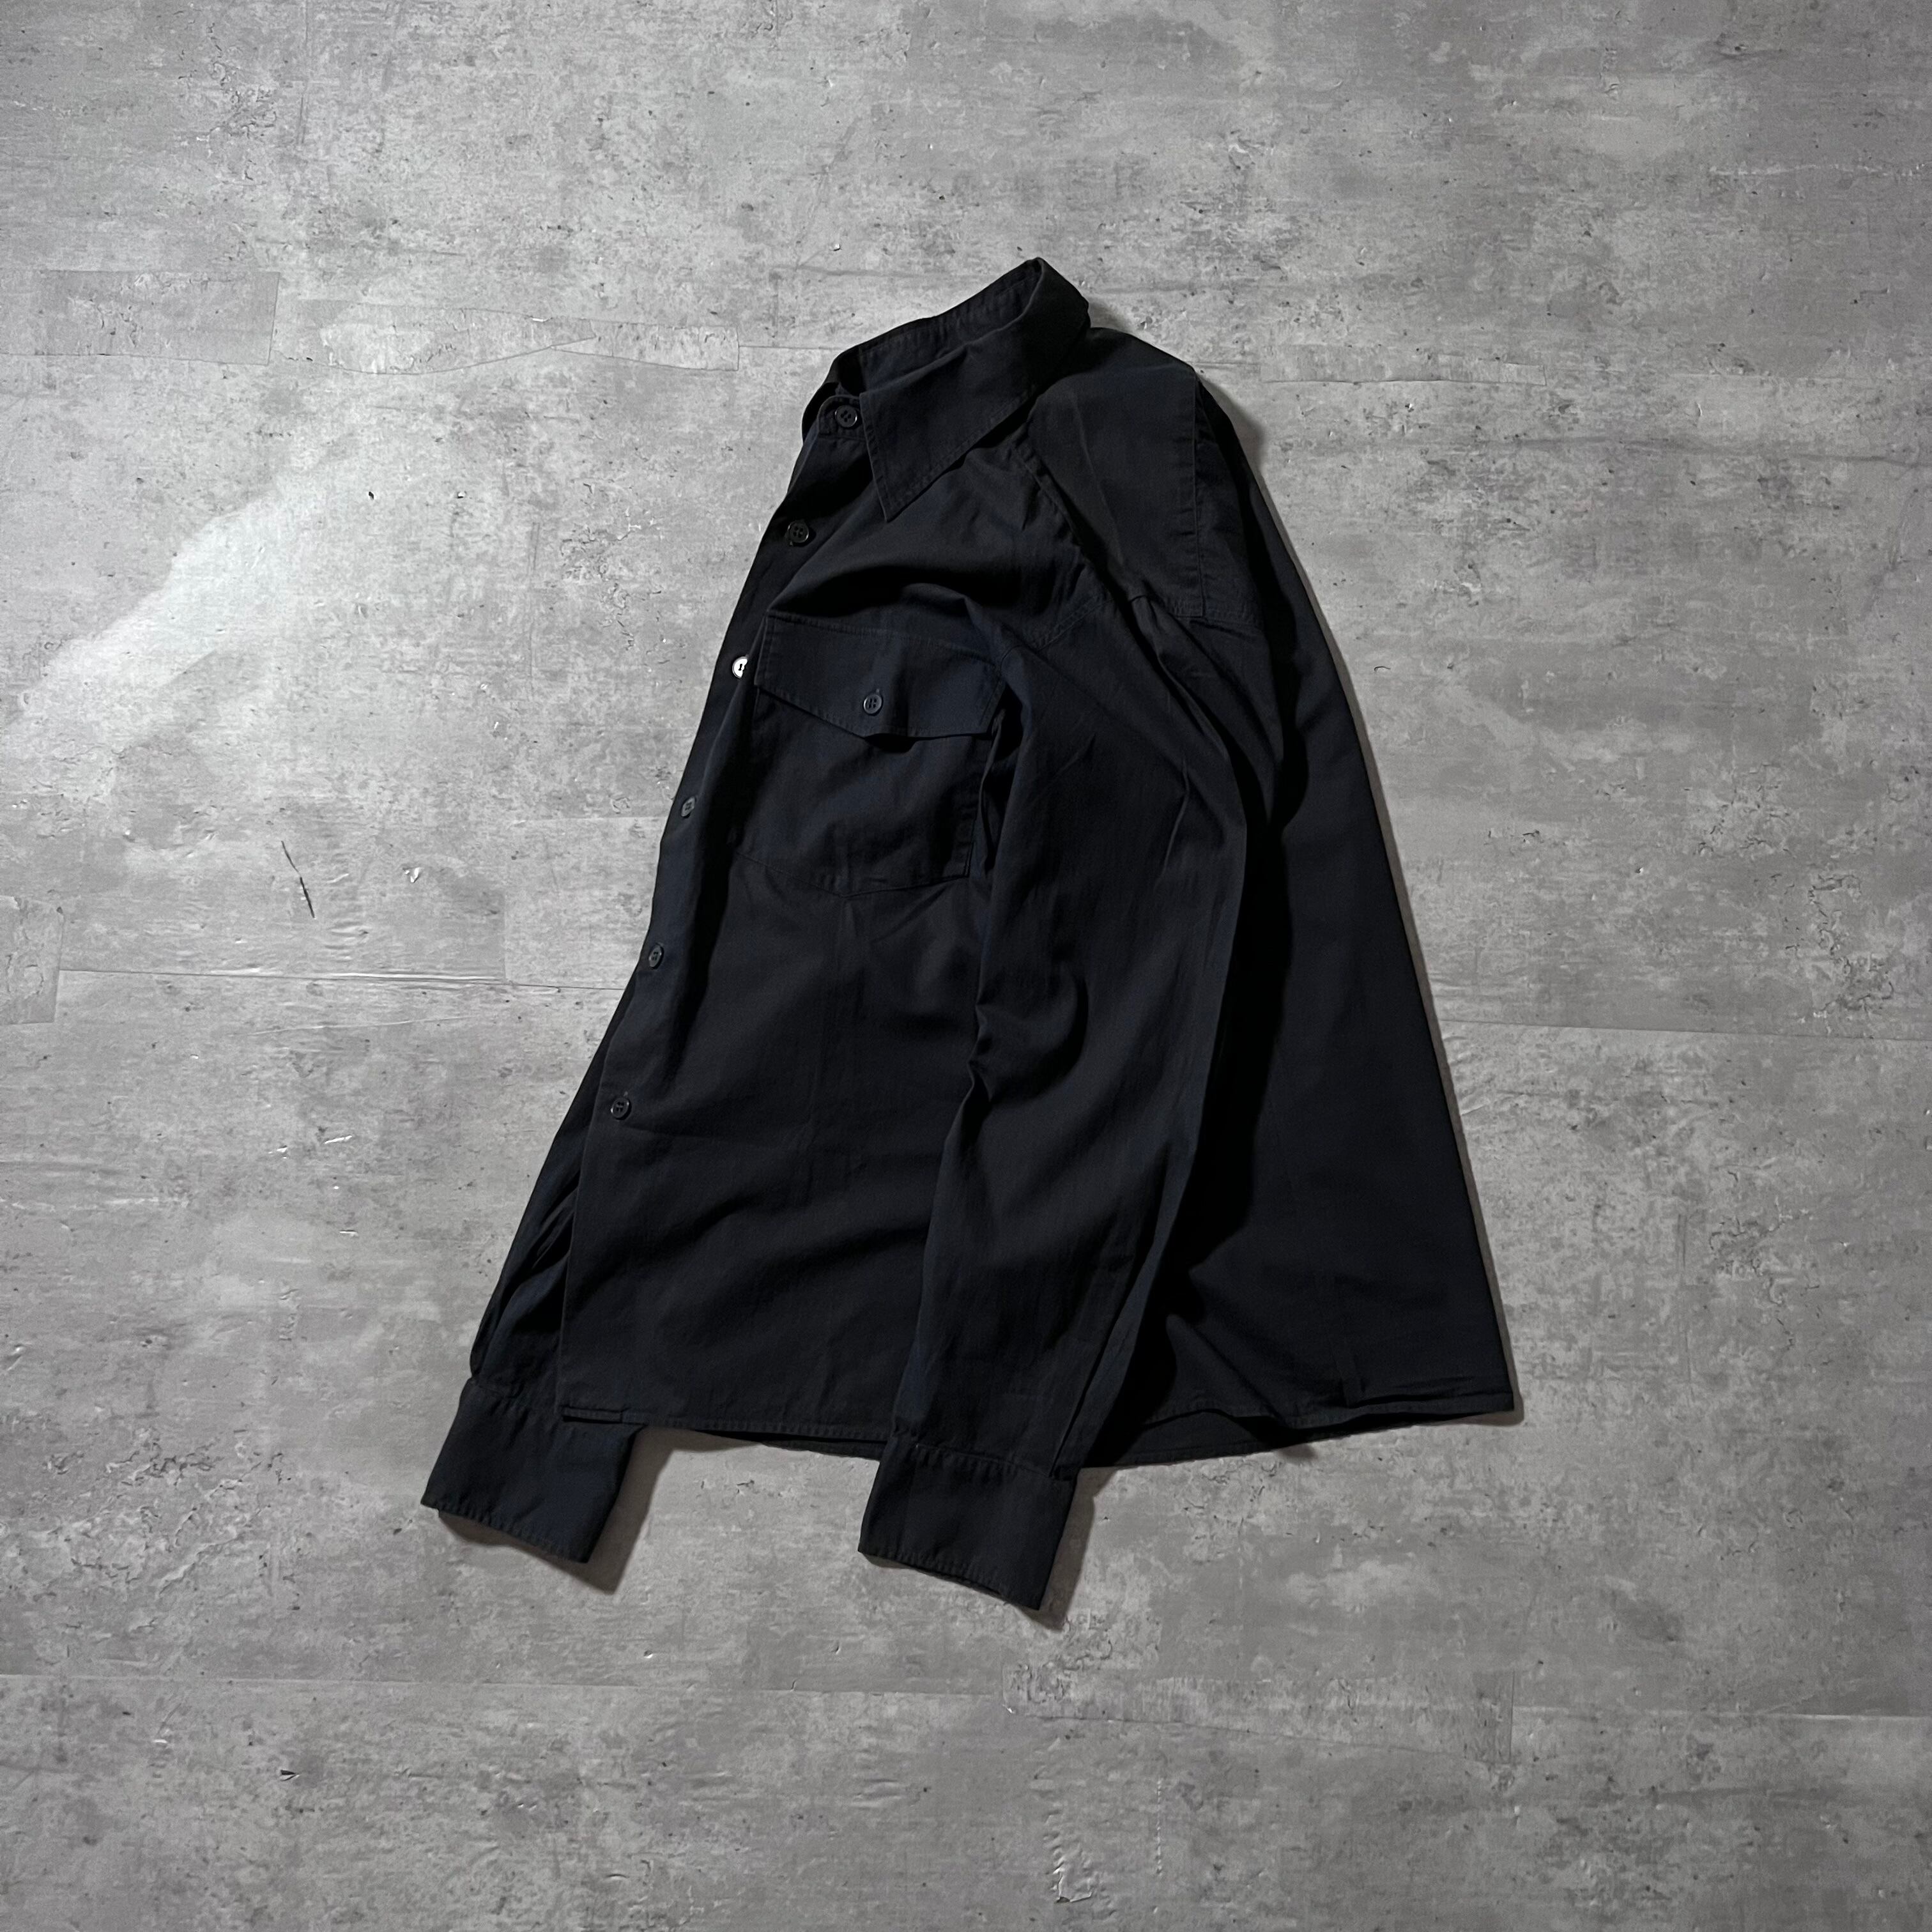 90s “agnes b.” made in France french black work shirt 90年代 